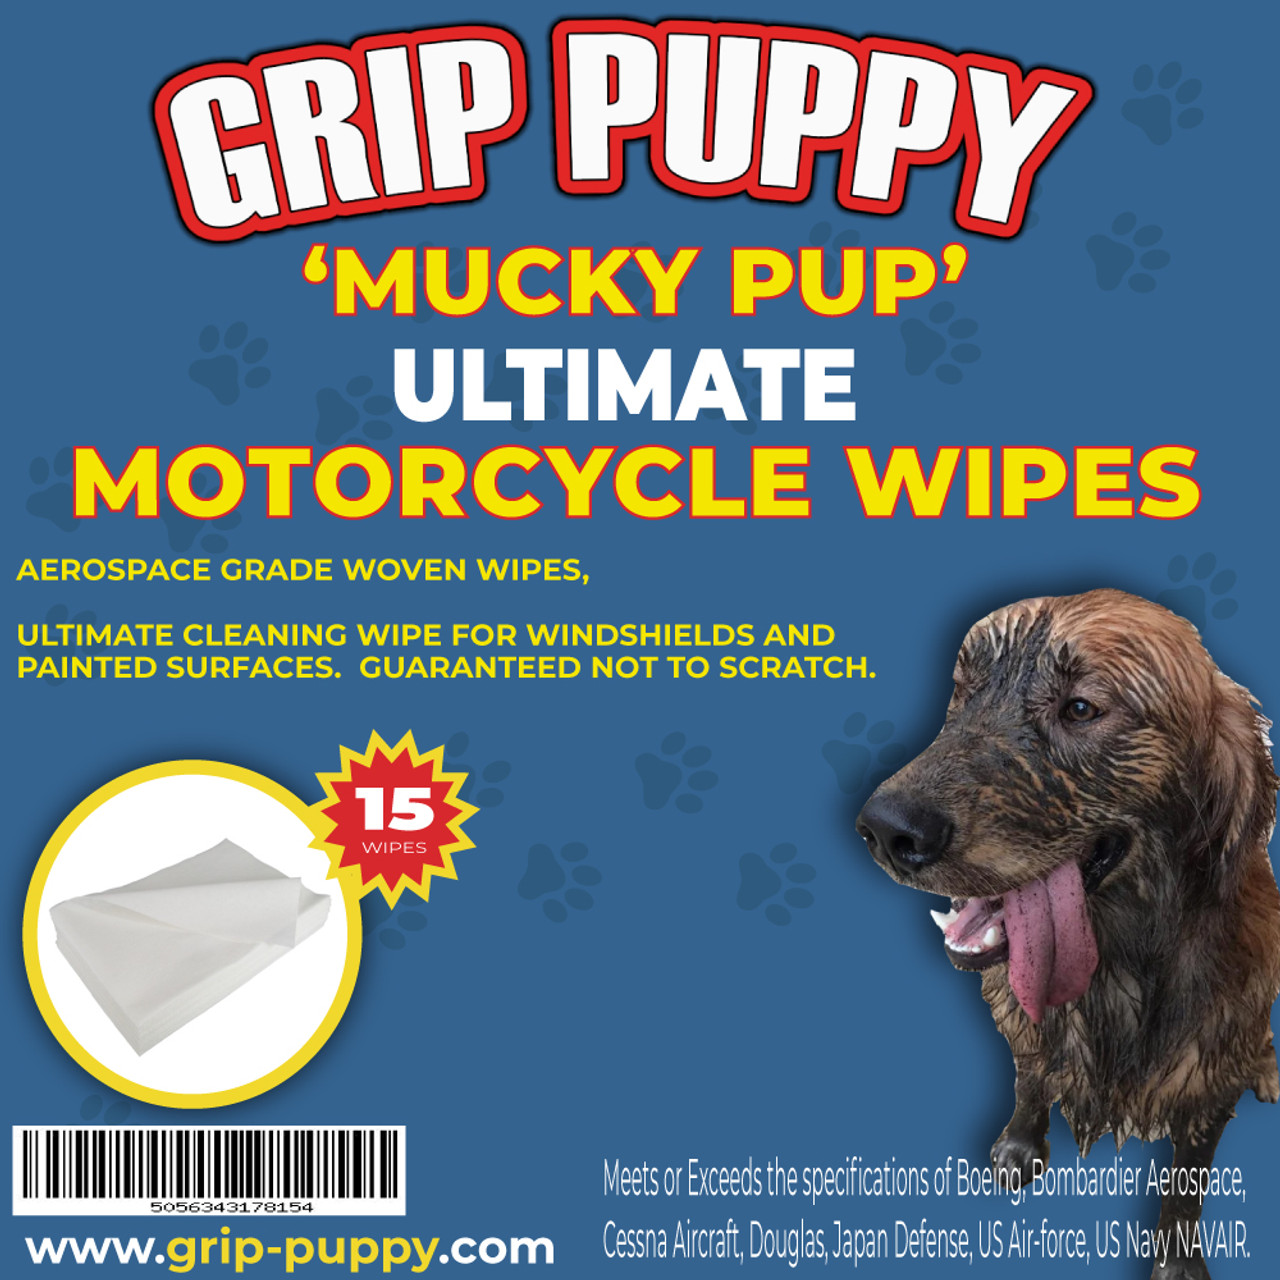 https://cdn11.bigcommerce.com/s-ygbxchczgj/images/stencil/1280x1280/products/438/1863/mucky_pup_wipes__74052.1634437676.JPG?c=1